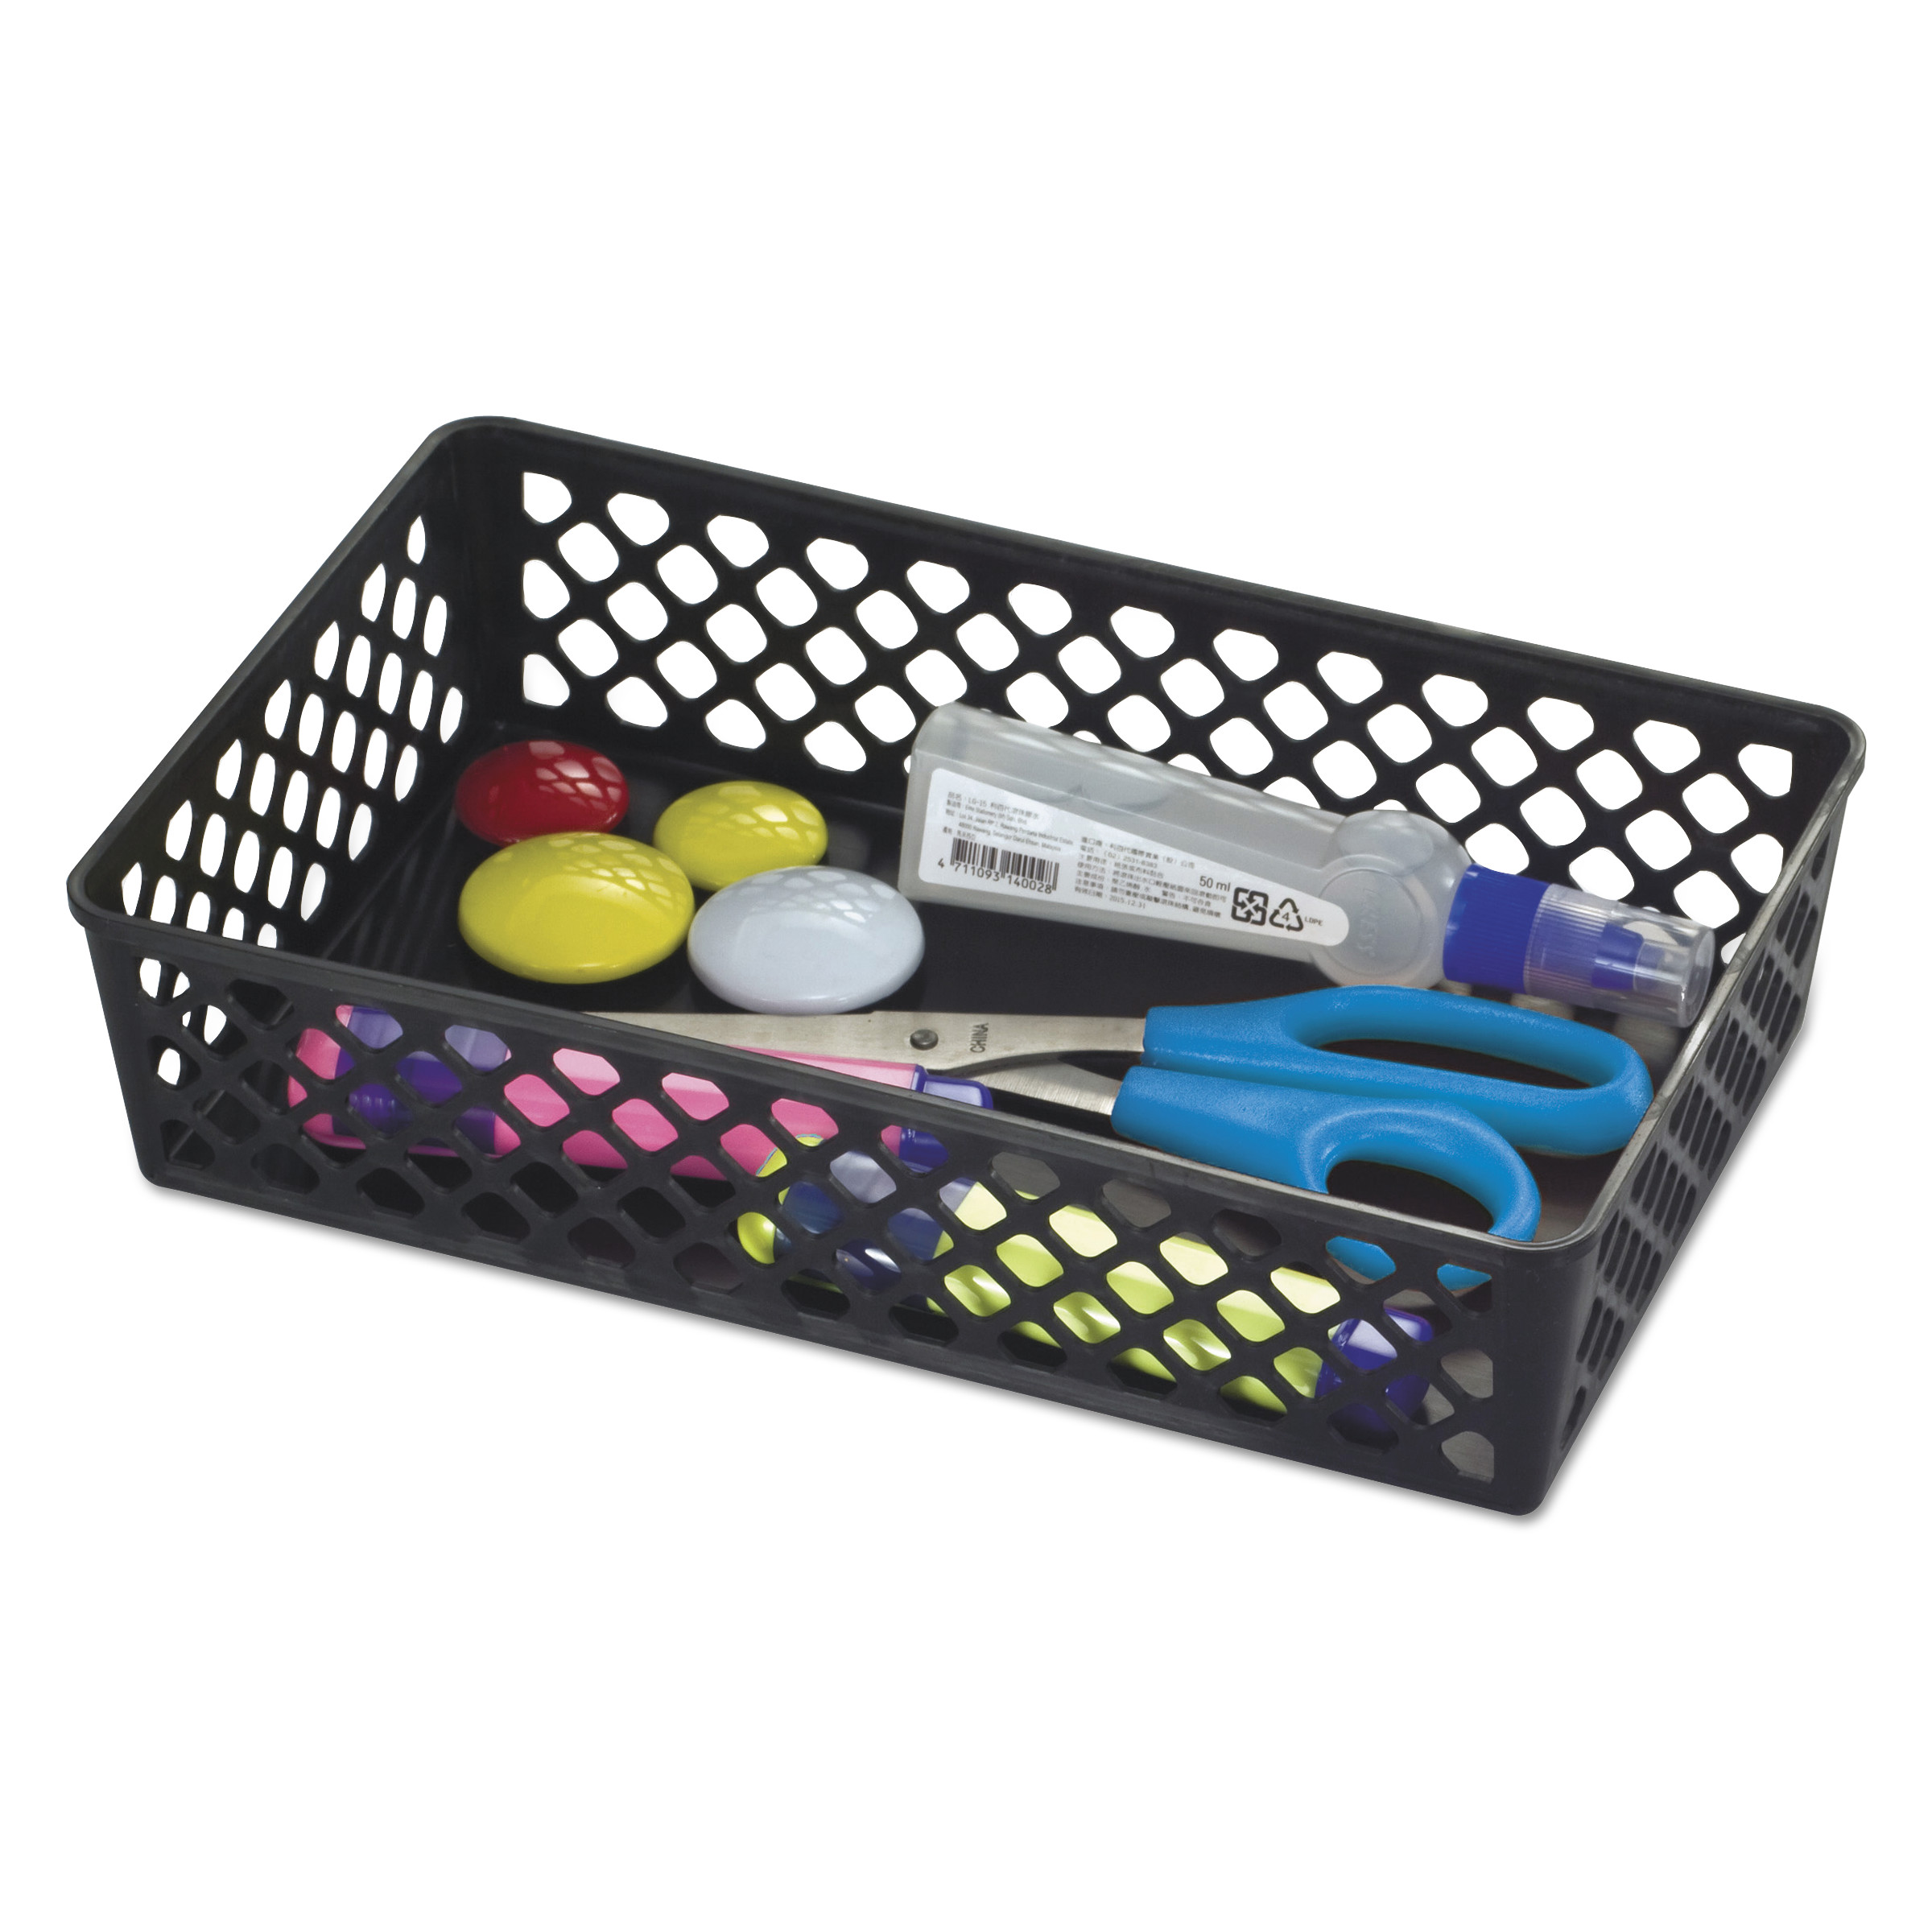  Officemate 26202 Recycled Supply Basket, 10.0625 x 6.125 x 2.375, Black (OIC26202) 